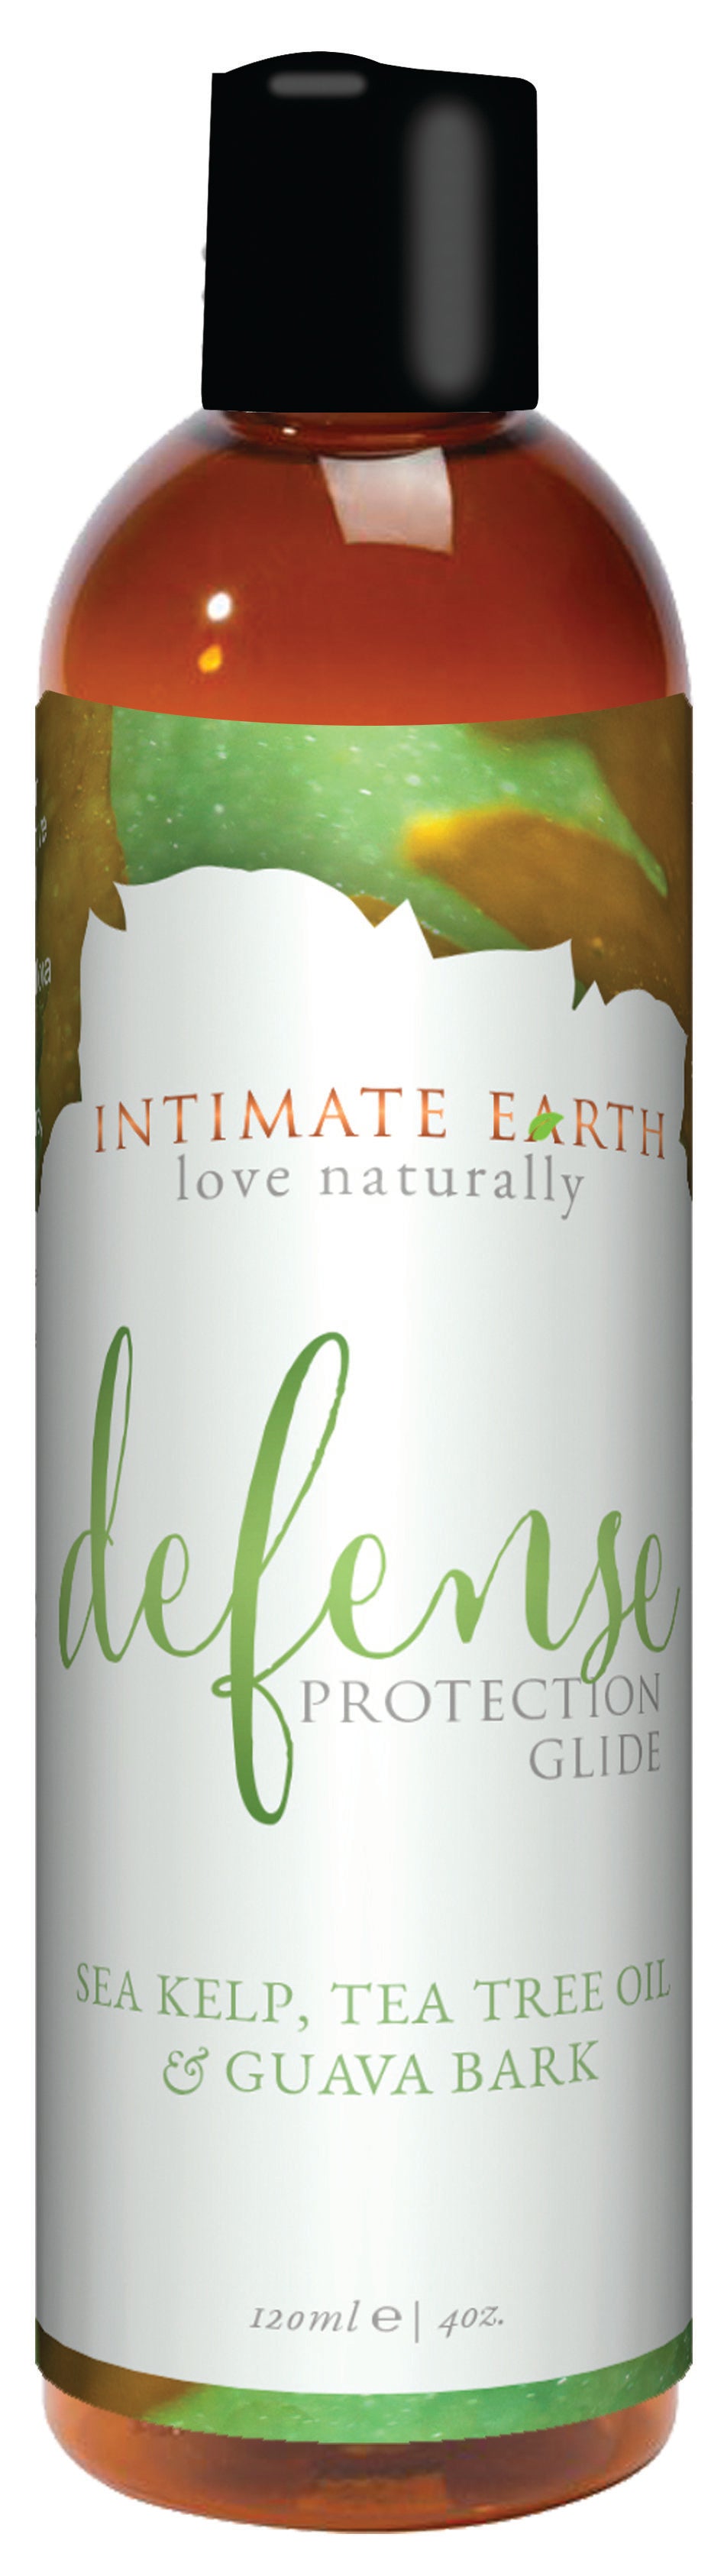 Intimate Earth - Defense Protection Glide 240 ml